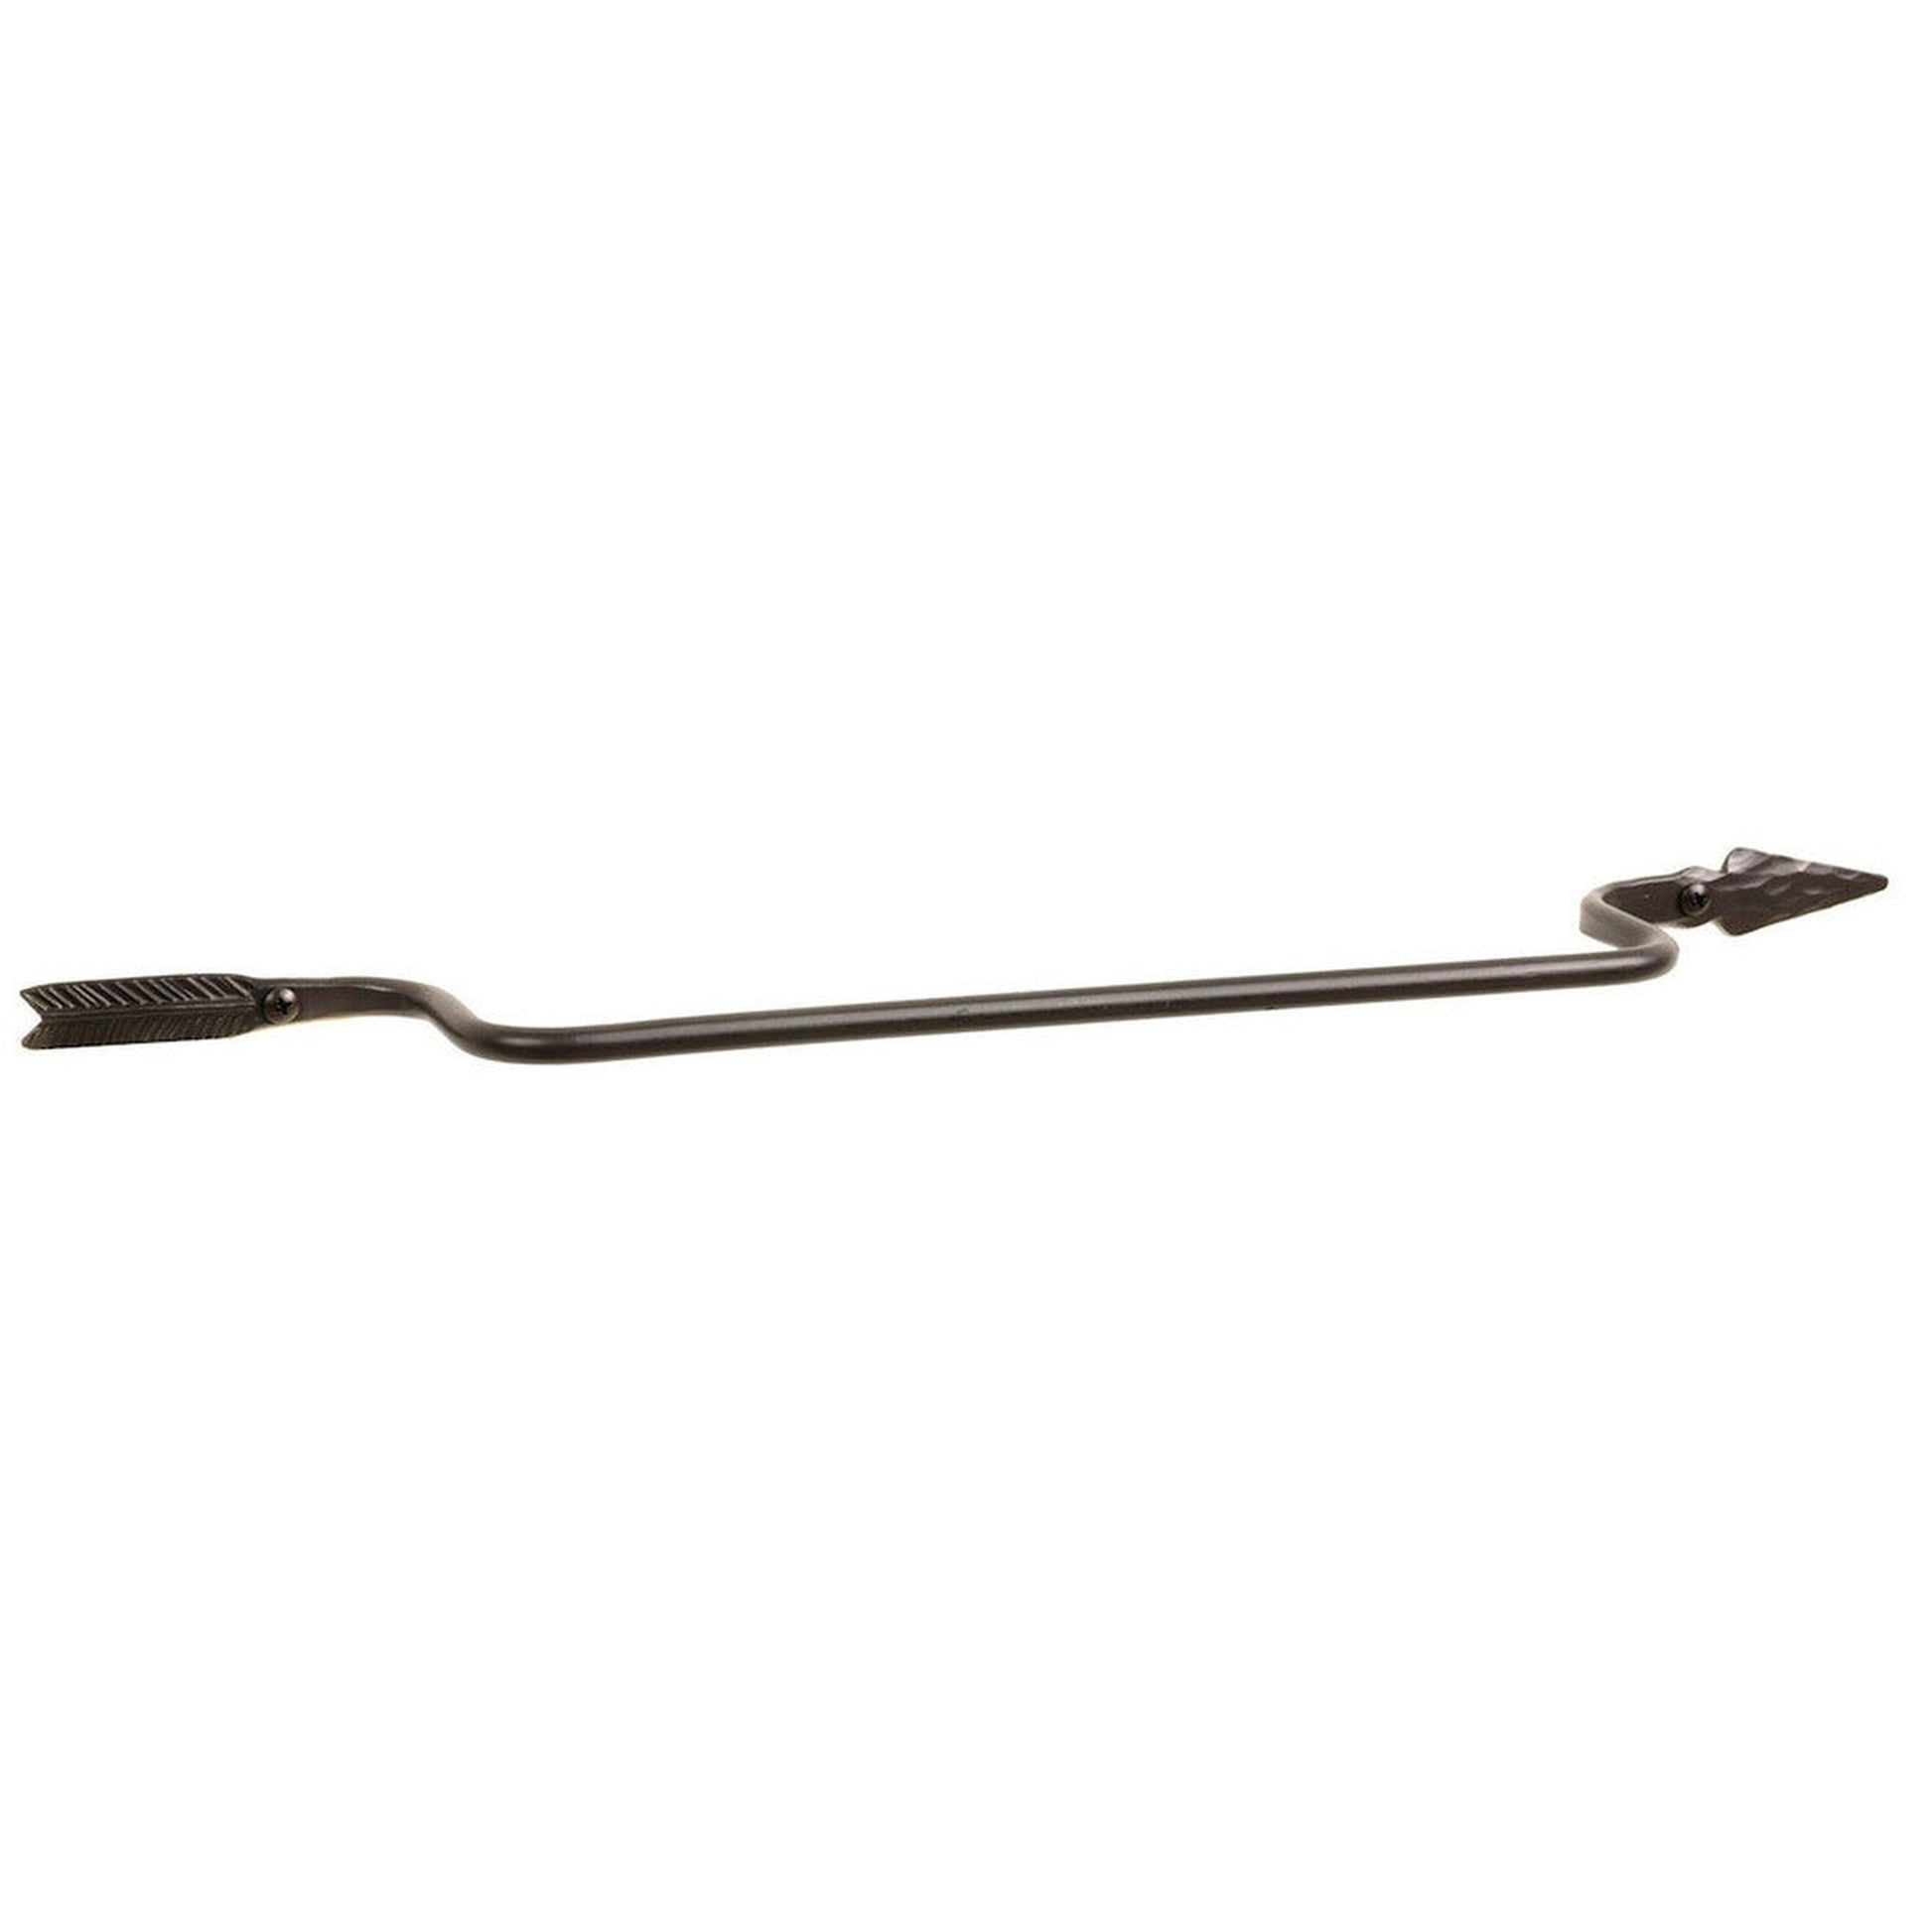 Stone County Ironworks Quapaw 16" Natural Black Iron Towel Bar With Gold Iron Accent